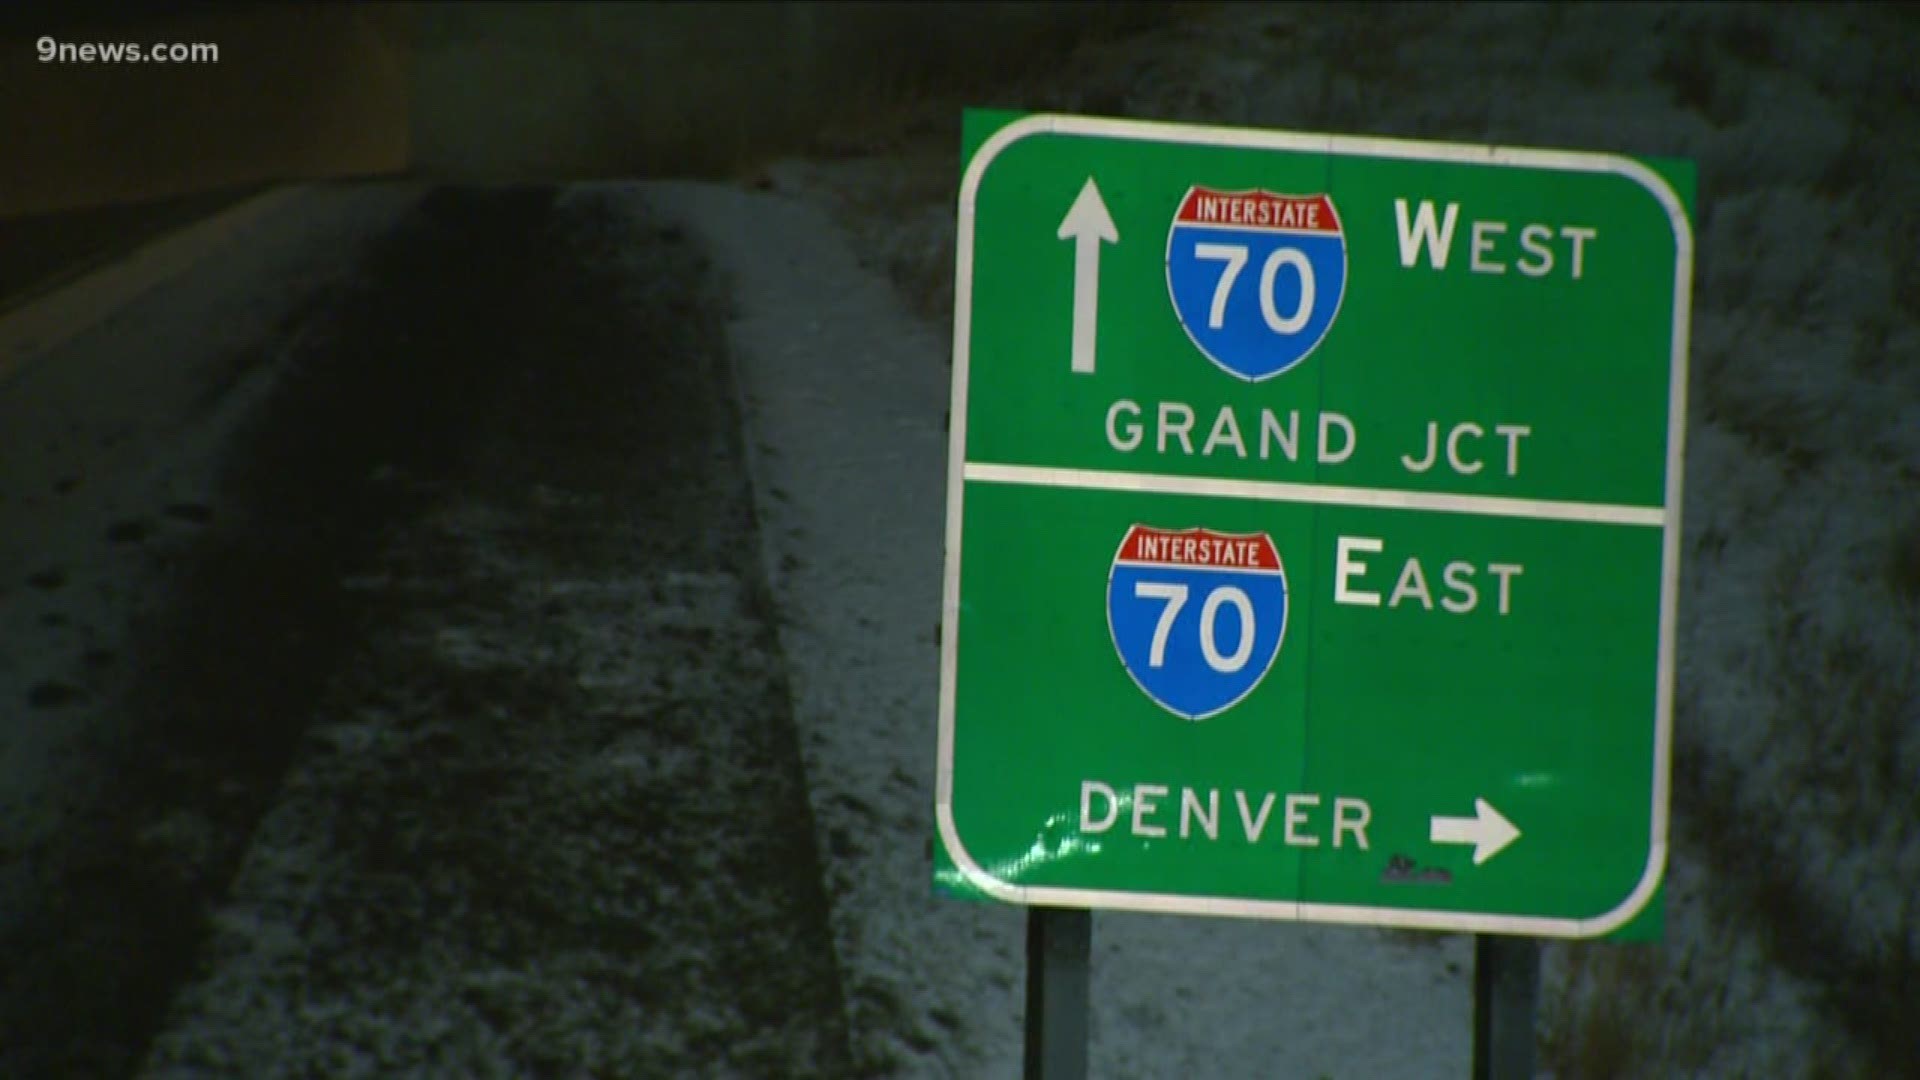 Anyone driving to Colorado's High Country should be prepared for conditions and delays, as snow moves through the state.